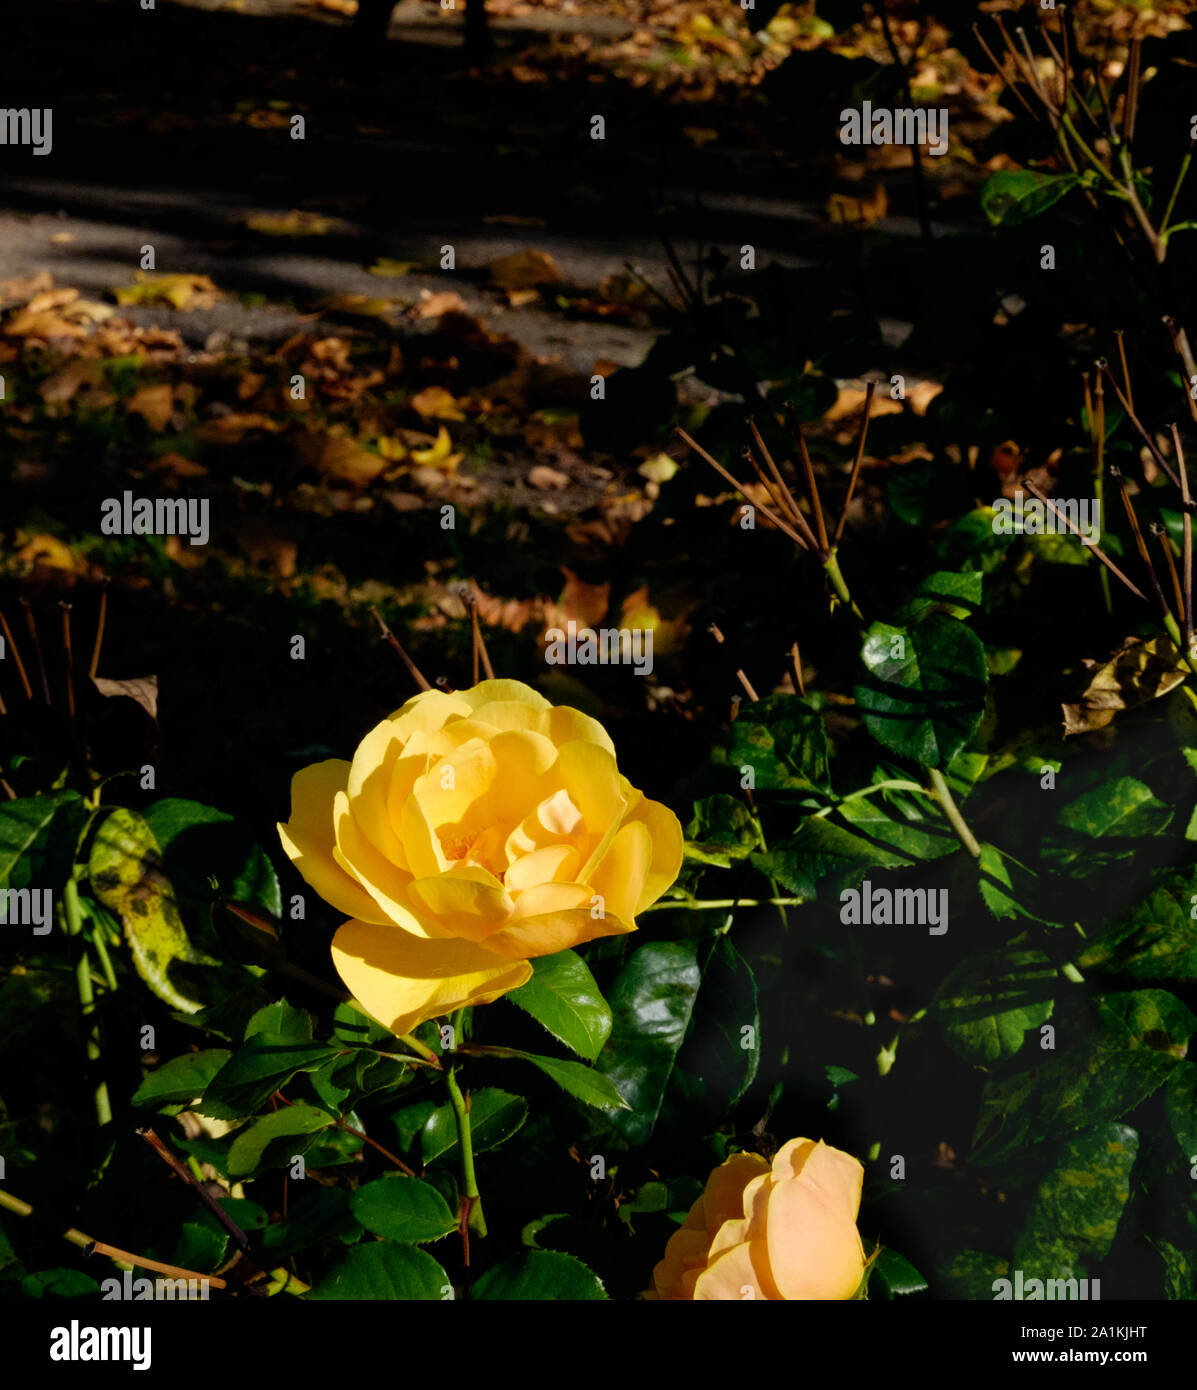 Close up of yellow rose in full bloom, growing in the park with brown, fallen autumn leaves on the ground in the background. Stock Photo